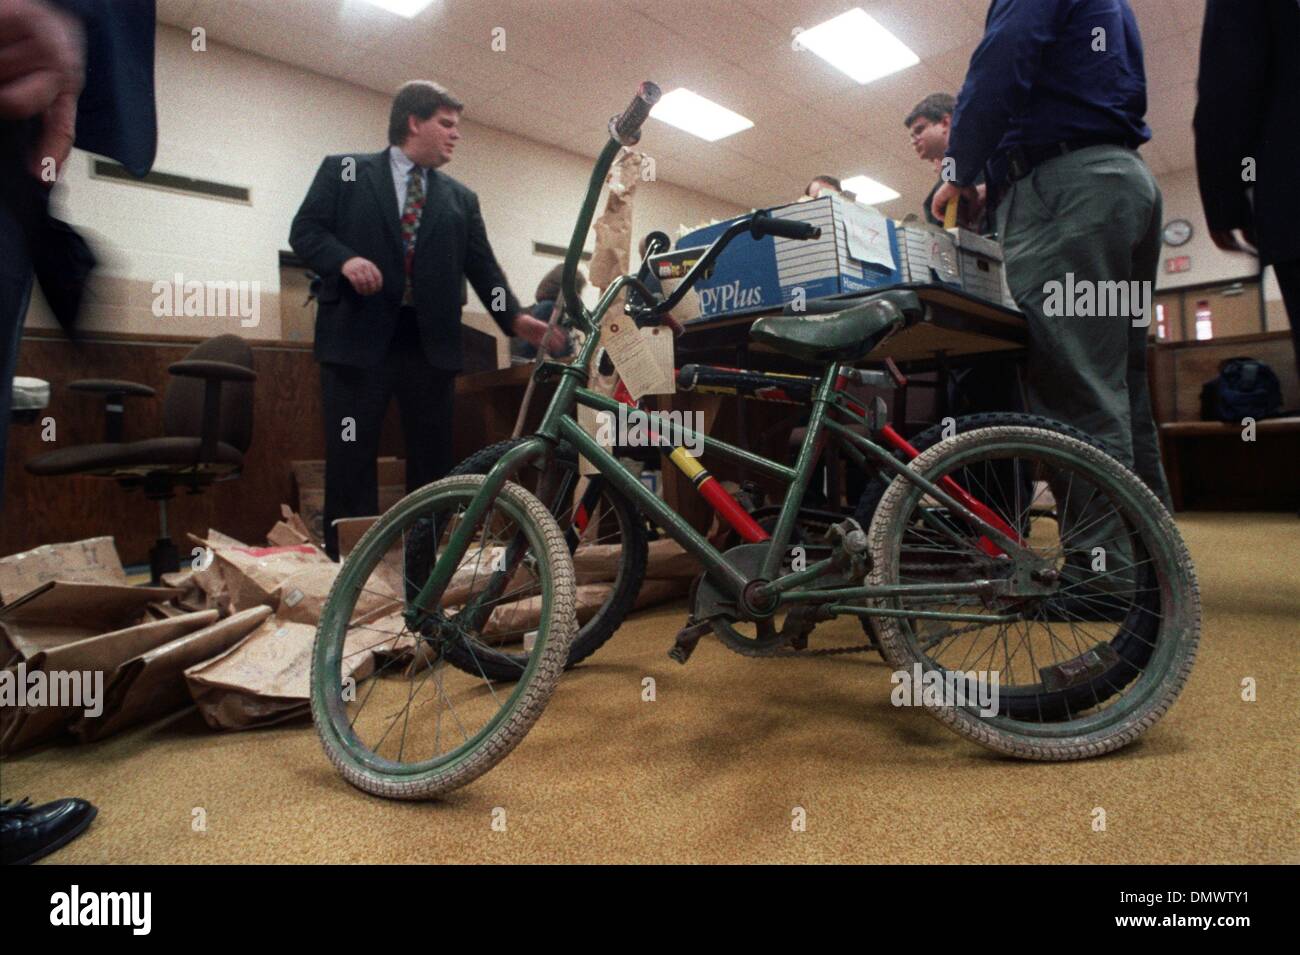 Jan. 26, 1994 - Corning, AR, U.S. - January 26, 1994 - The last time Michael Moore, Christopher Byers and Steve Branch were seen alive they were riding these bicycles, which are entered as evidence in the murder trial of Jessie Lloyd Misskelley Jr. One of Misskelley 's attorneys, Greg Crow of Paragould, is at left. Among witnesses on the first day of testimony Thursday was Steve Br Stock Photo